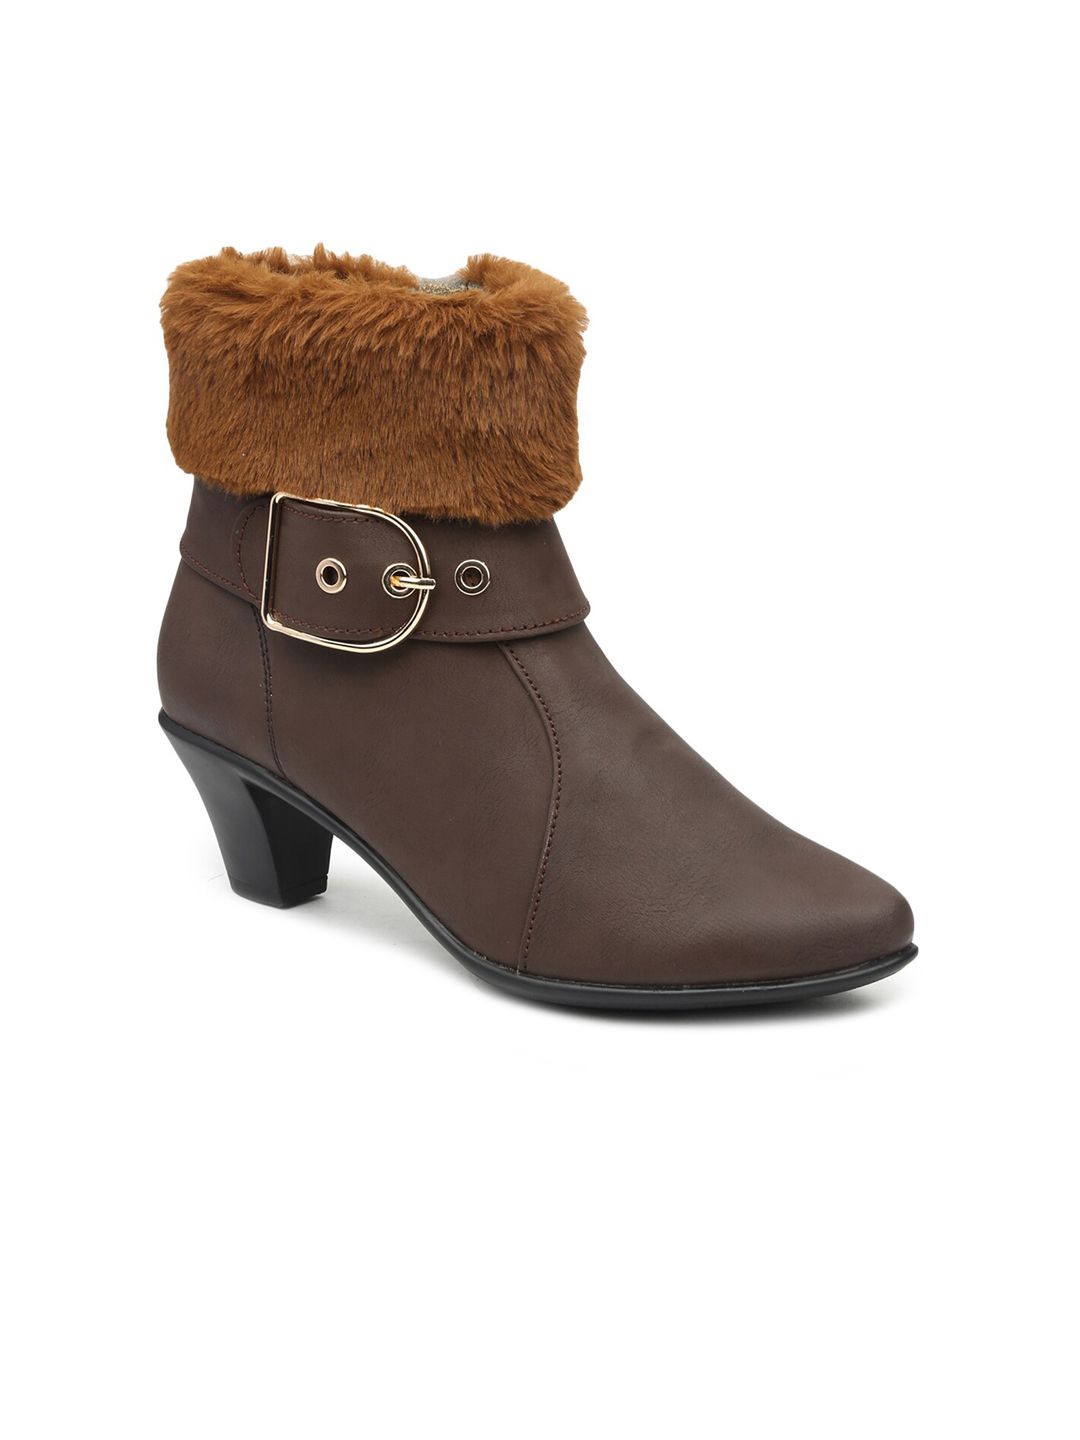 VALIOSAA Women Brown Faux Fur Trim Heeled Boots Price in India